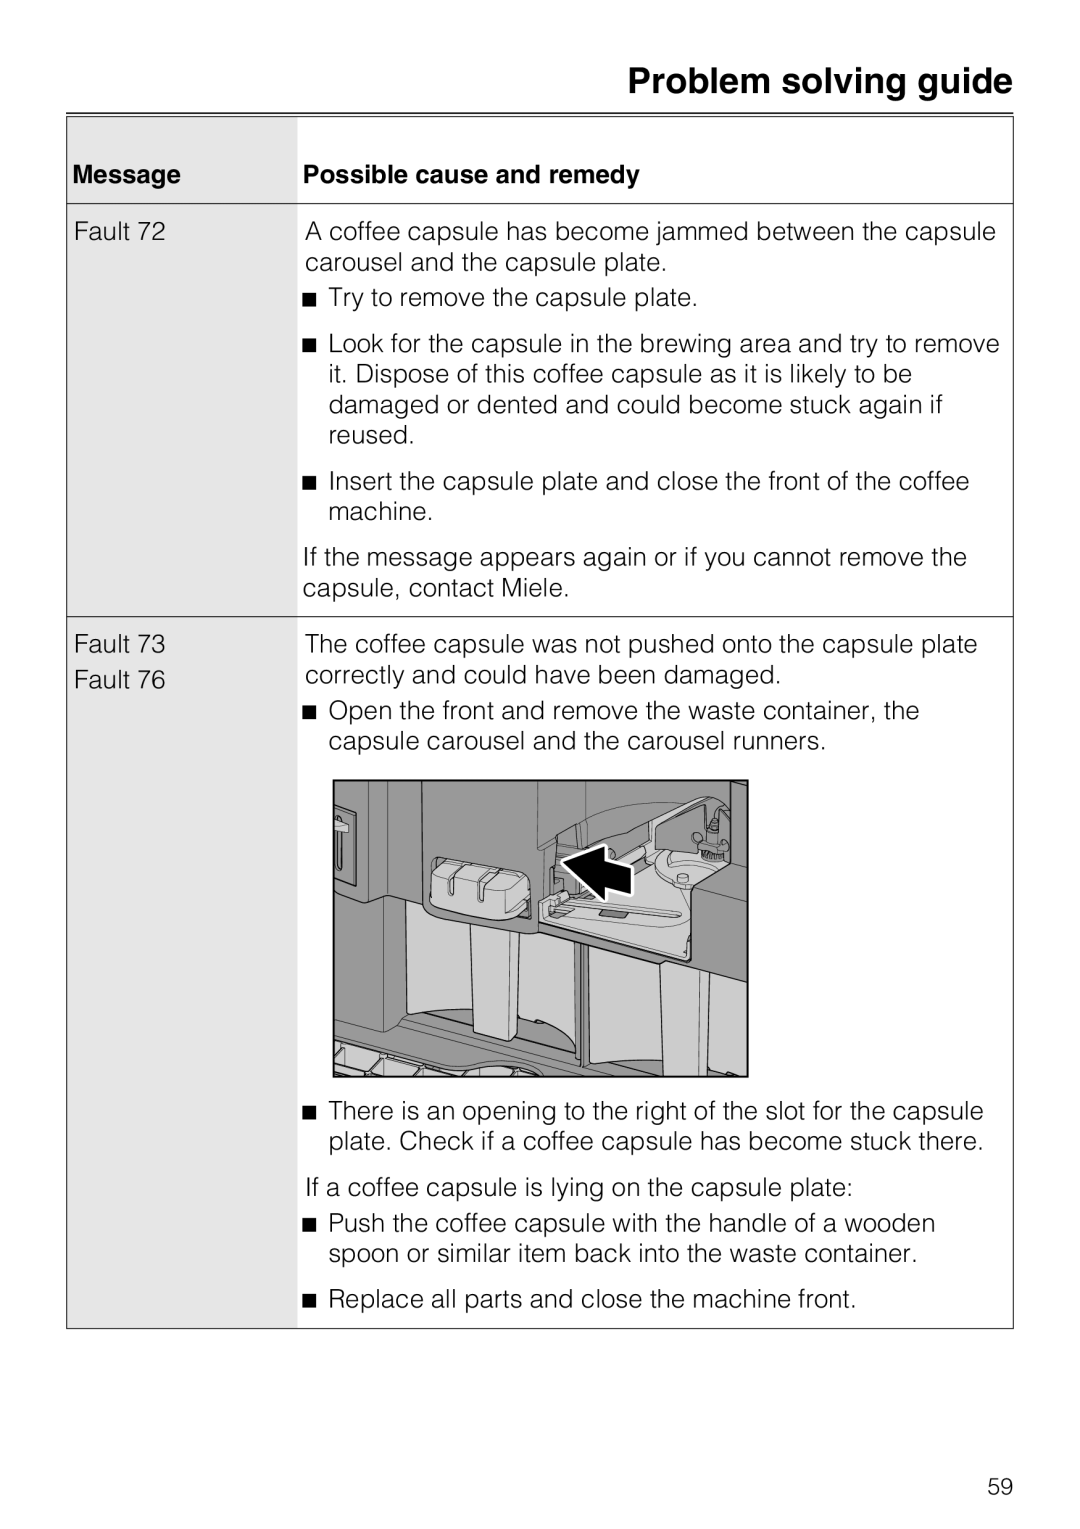 Miele CVA 6431 (C) installation instructions Problem solving guide, Message, Possible cause and remedy 